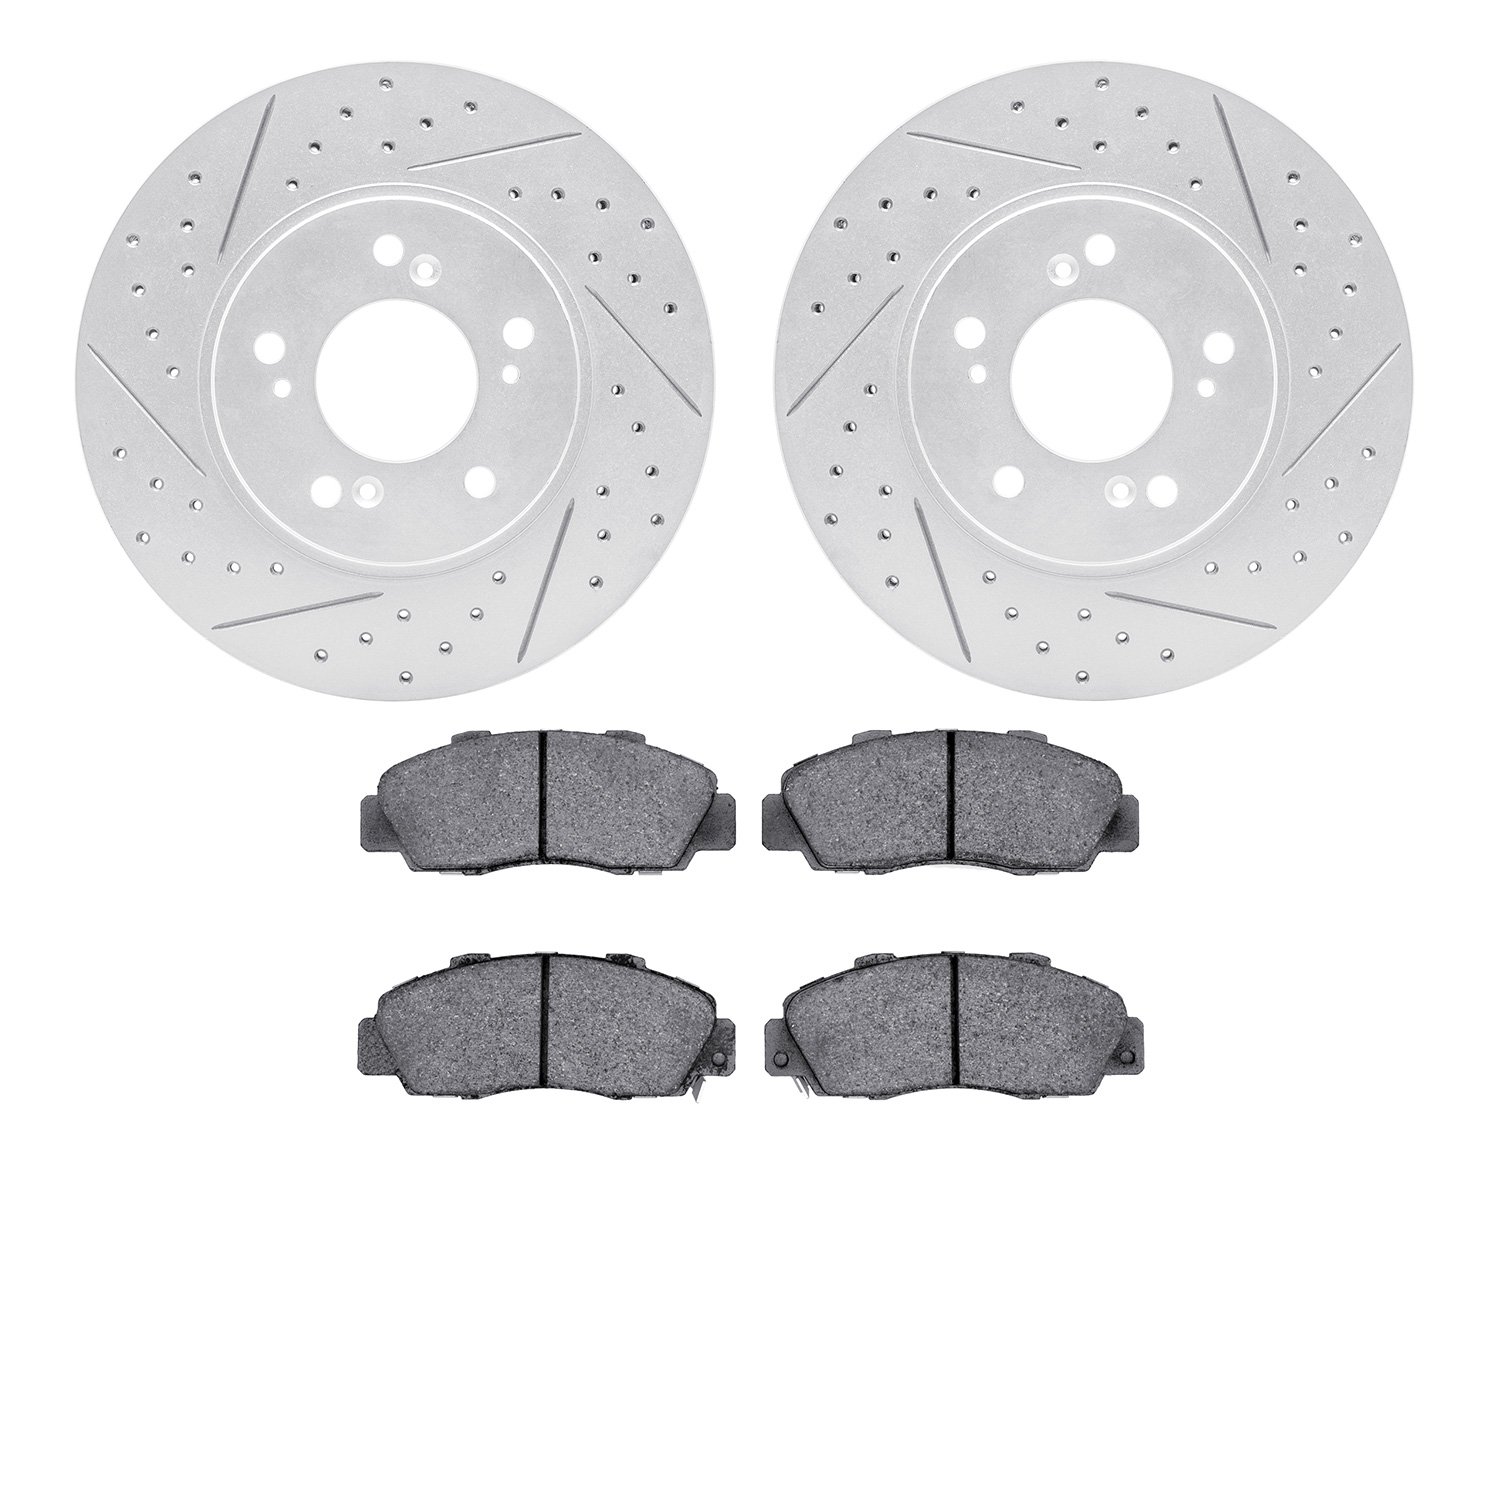 2502-58000 Geoperformance Drilled/Slotted Rotors w/5000 Advanced Brake Pads Kit, 1991-1996 Acura/Honda, Position: Front